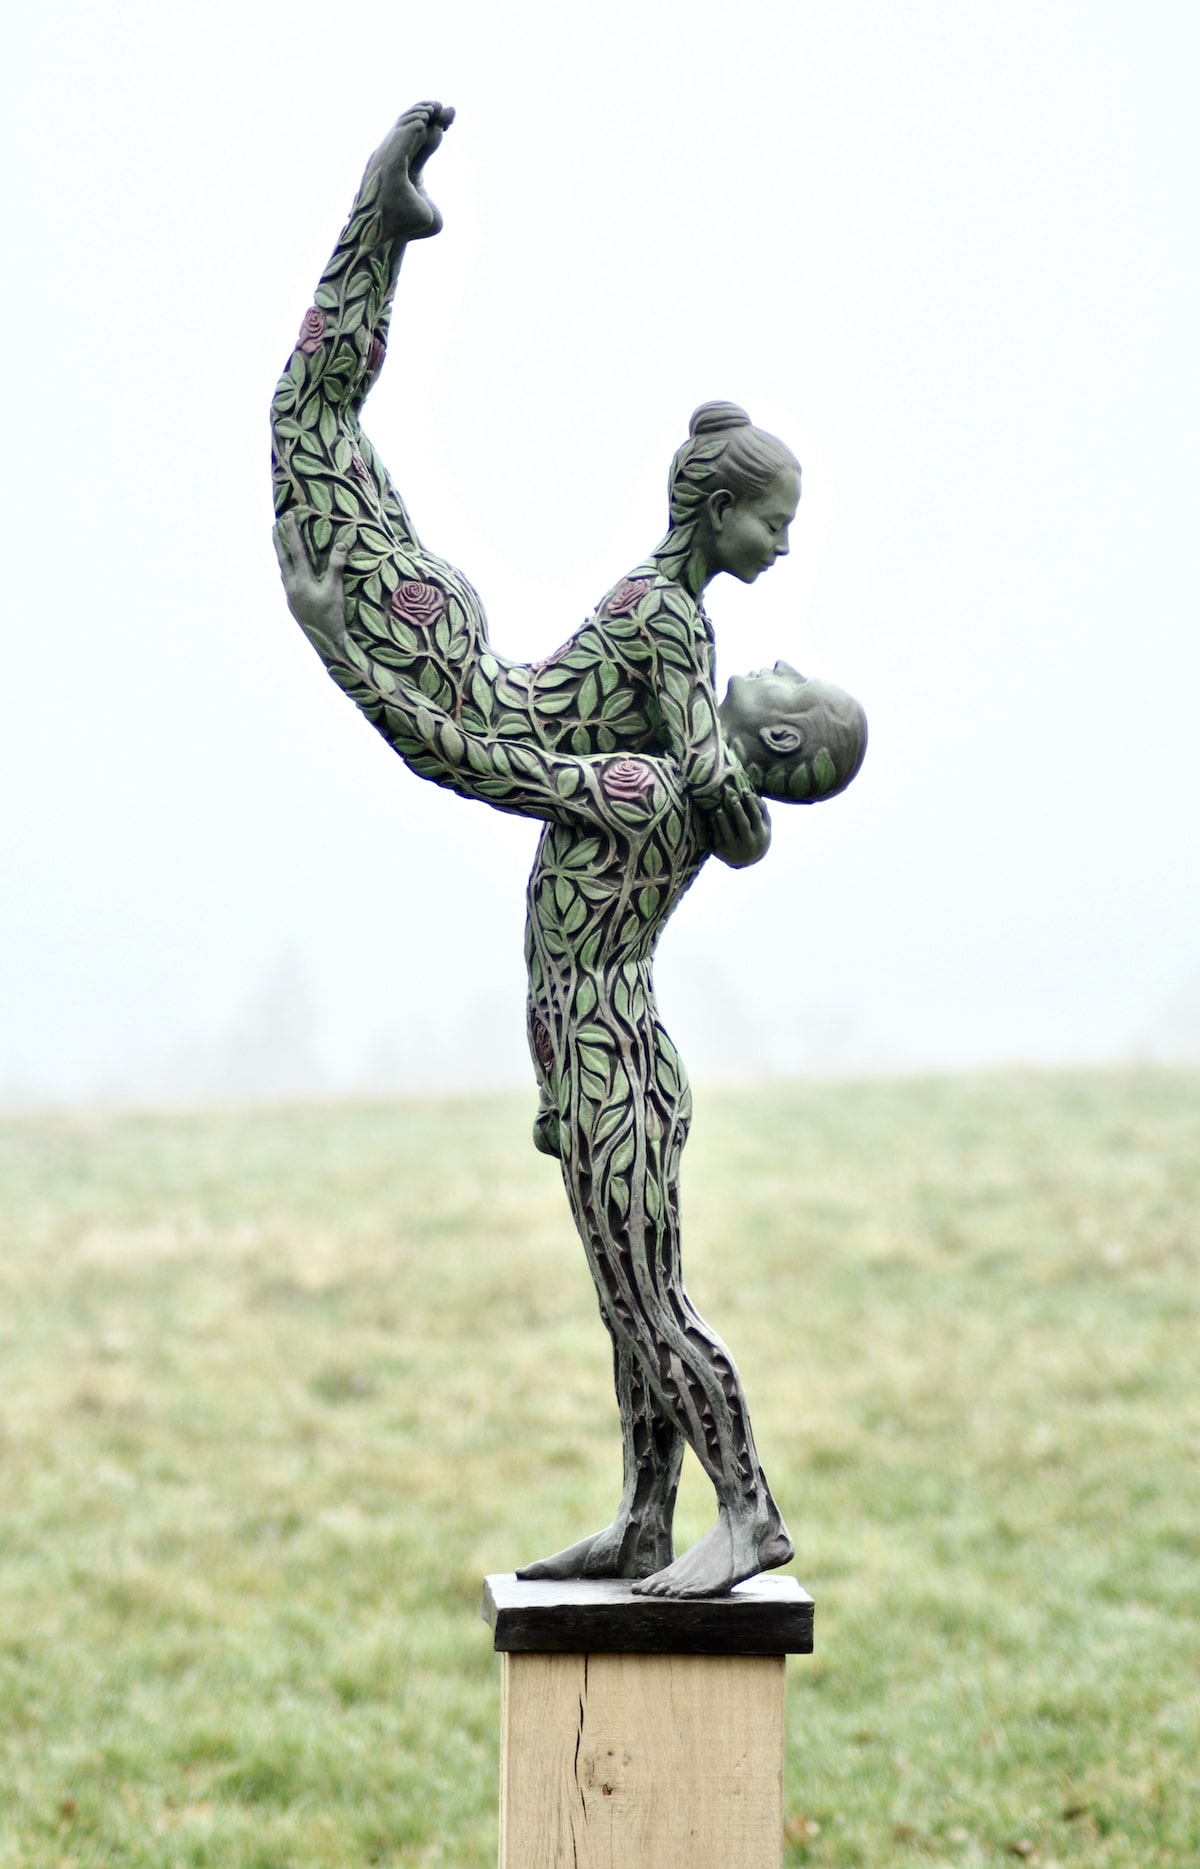 The Beauty Of Nature Fused With Elegant Human Movements In Lyrical Sculptures By Jonathan Hateley (4)